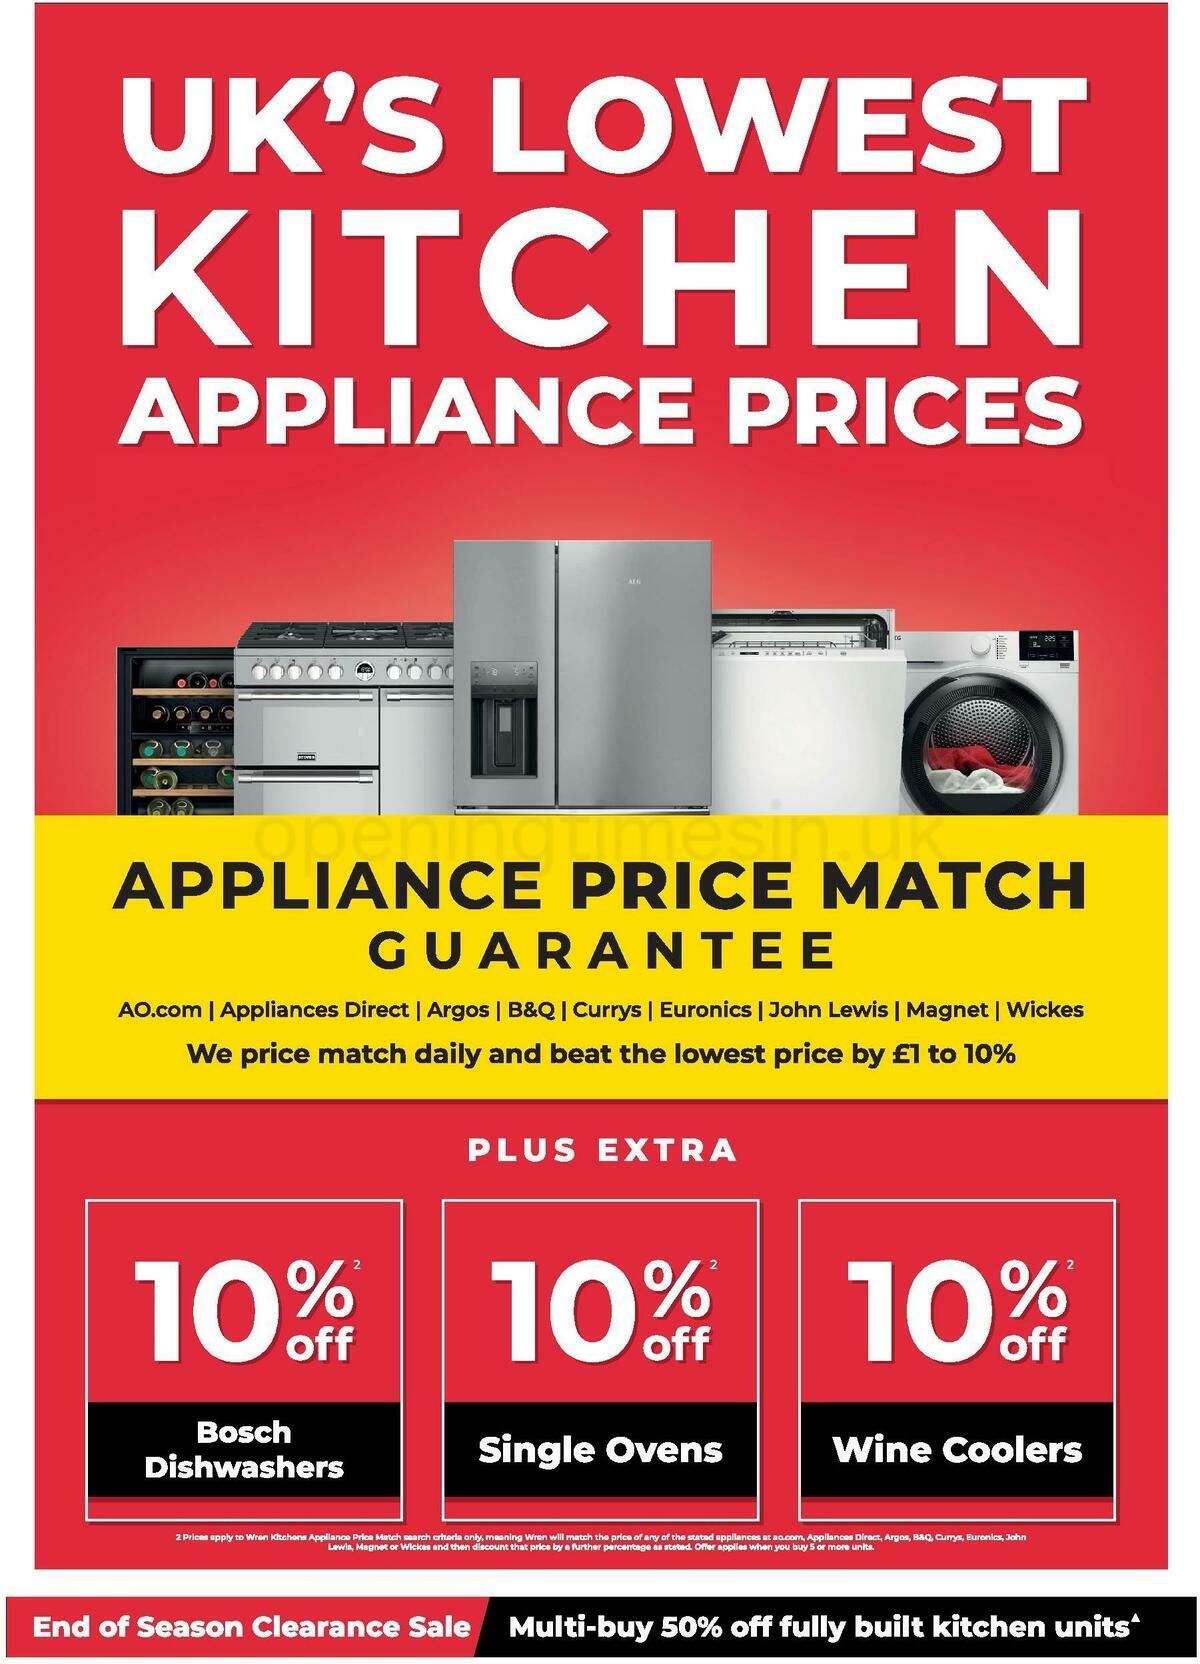 Wren Kitchens Offers from 16 March